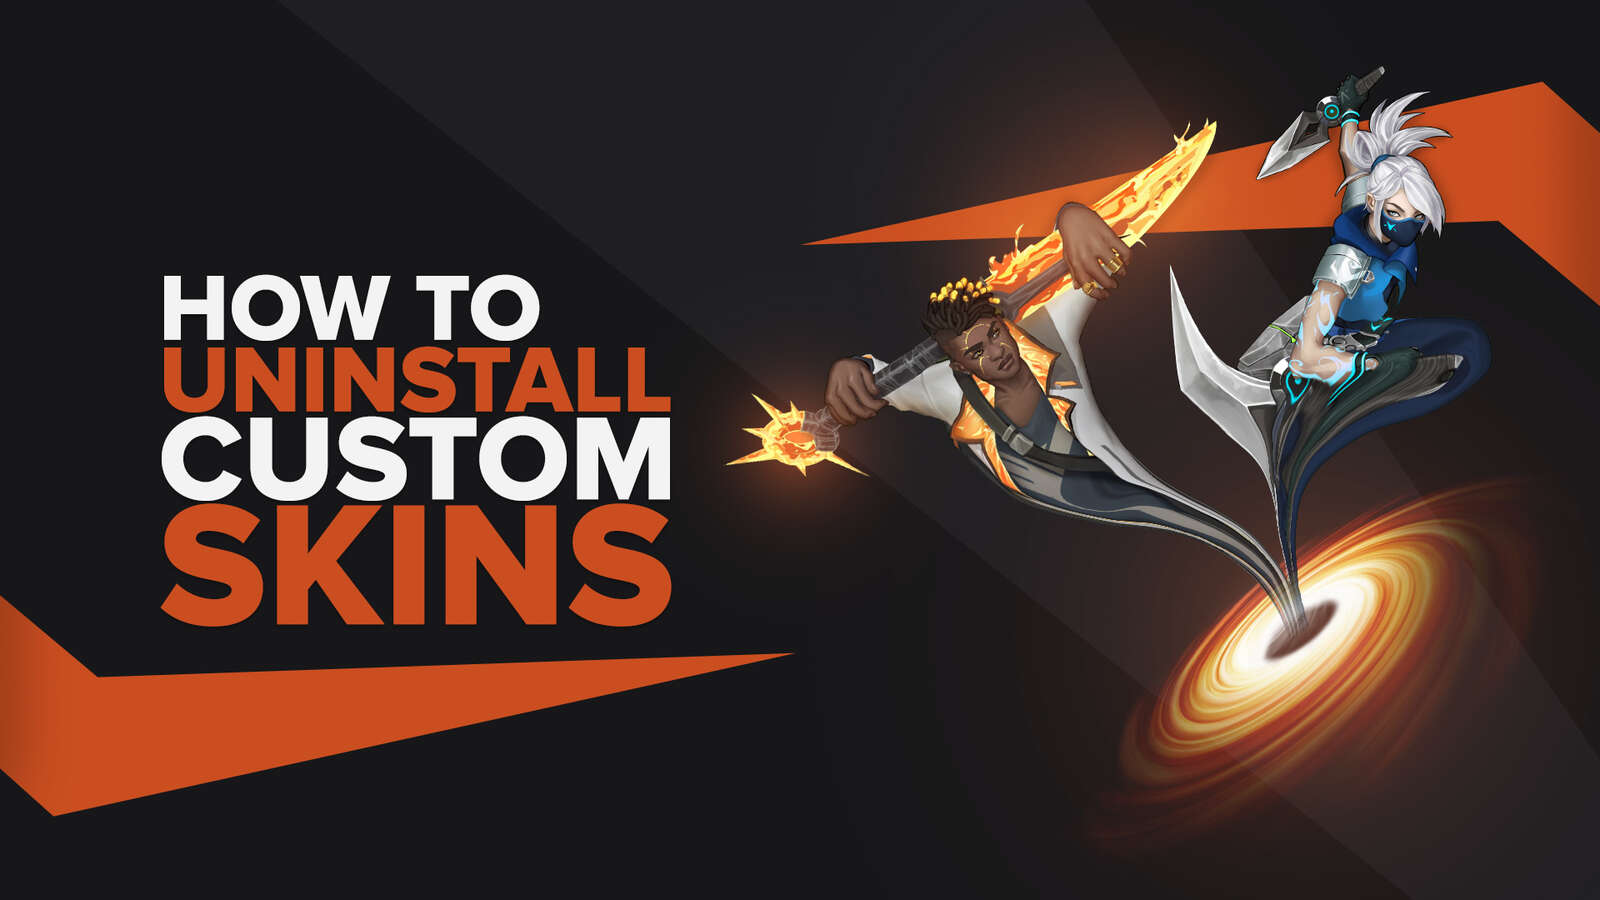 How to Uninstall Custom Skins in League of Legends